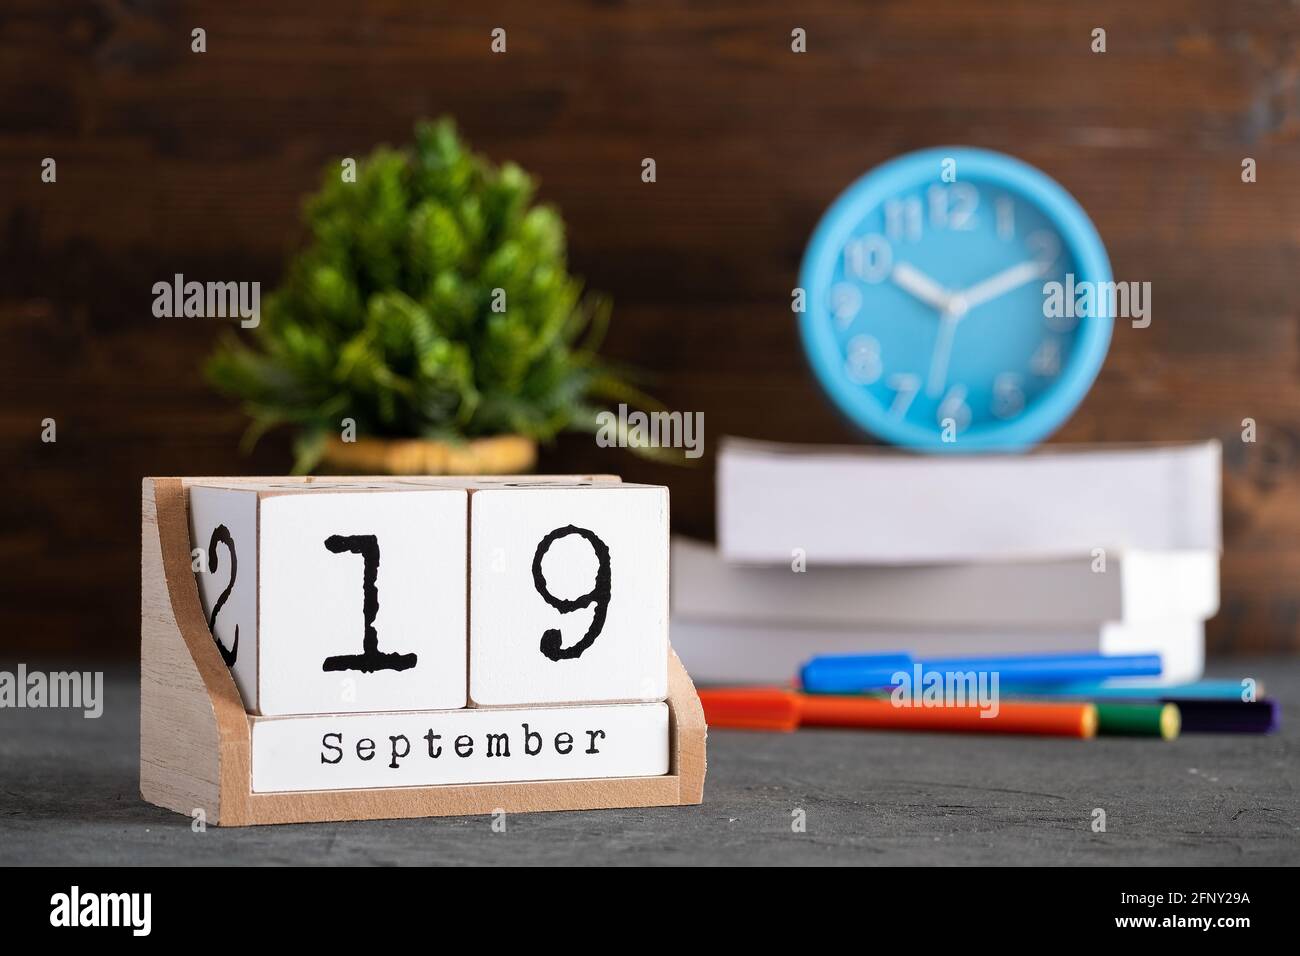 September 19th. September 19 wooden cube calendar with blur objects on background. Stock Photo